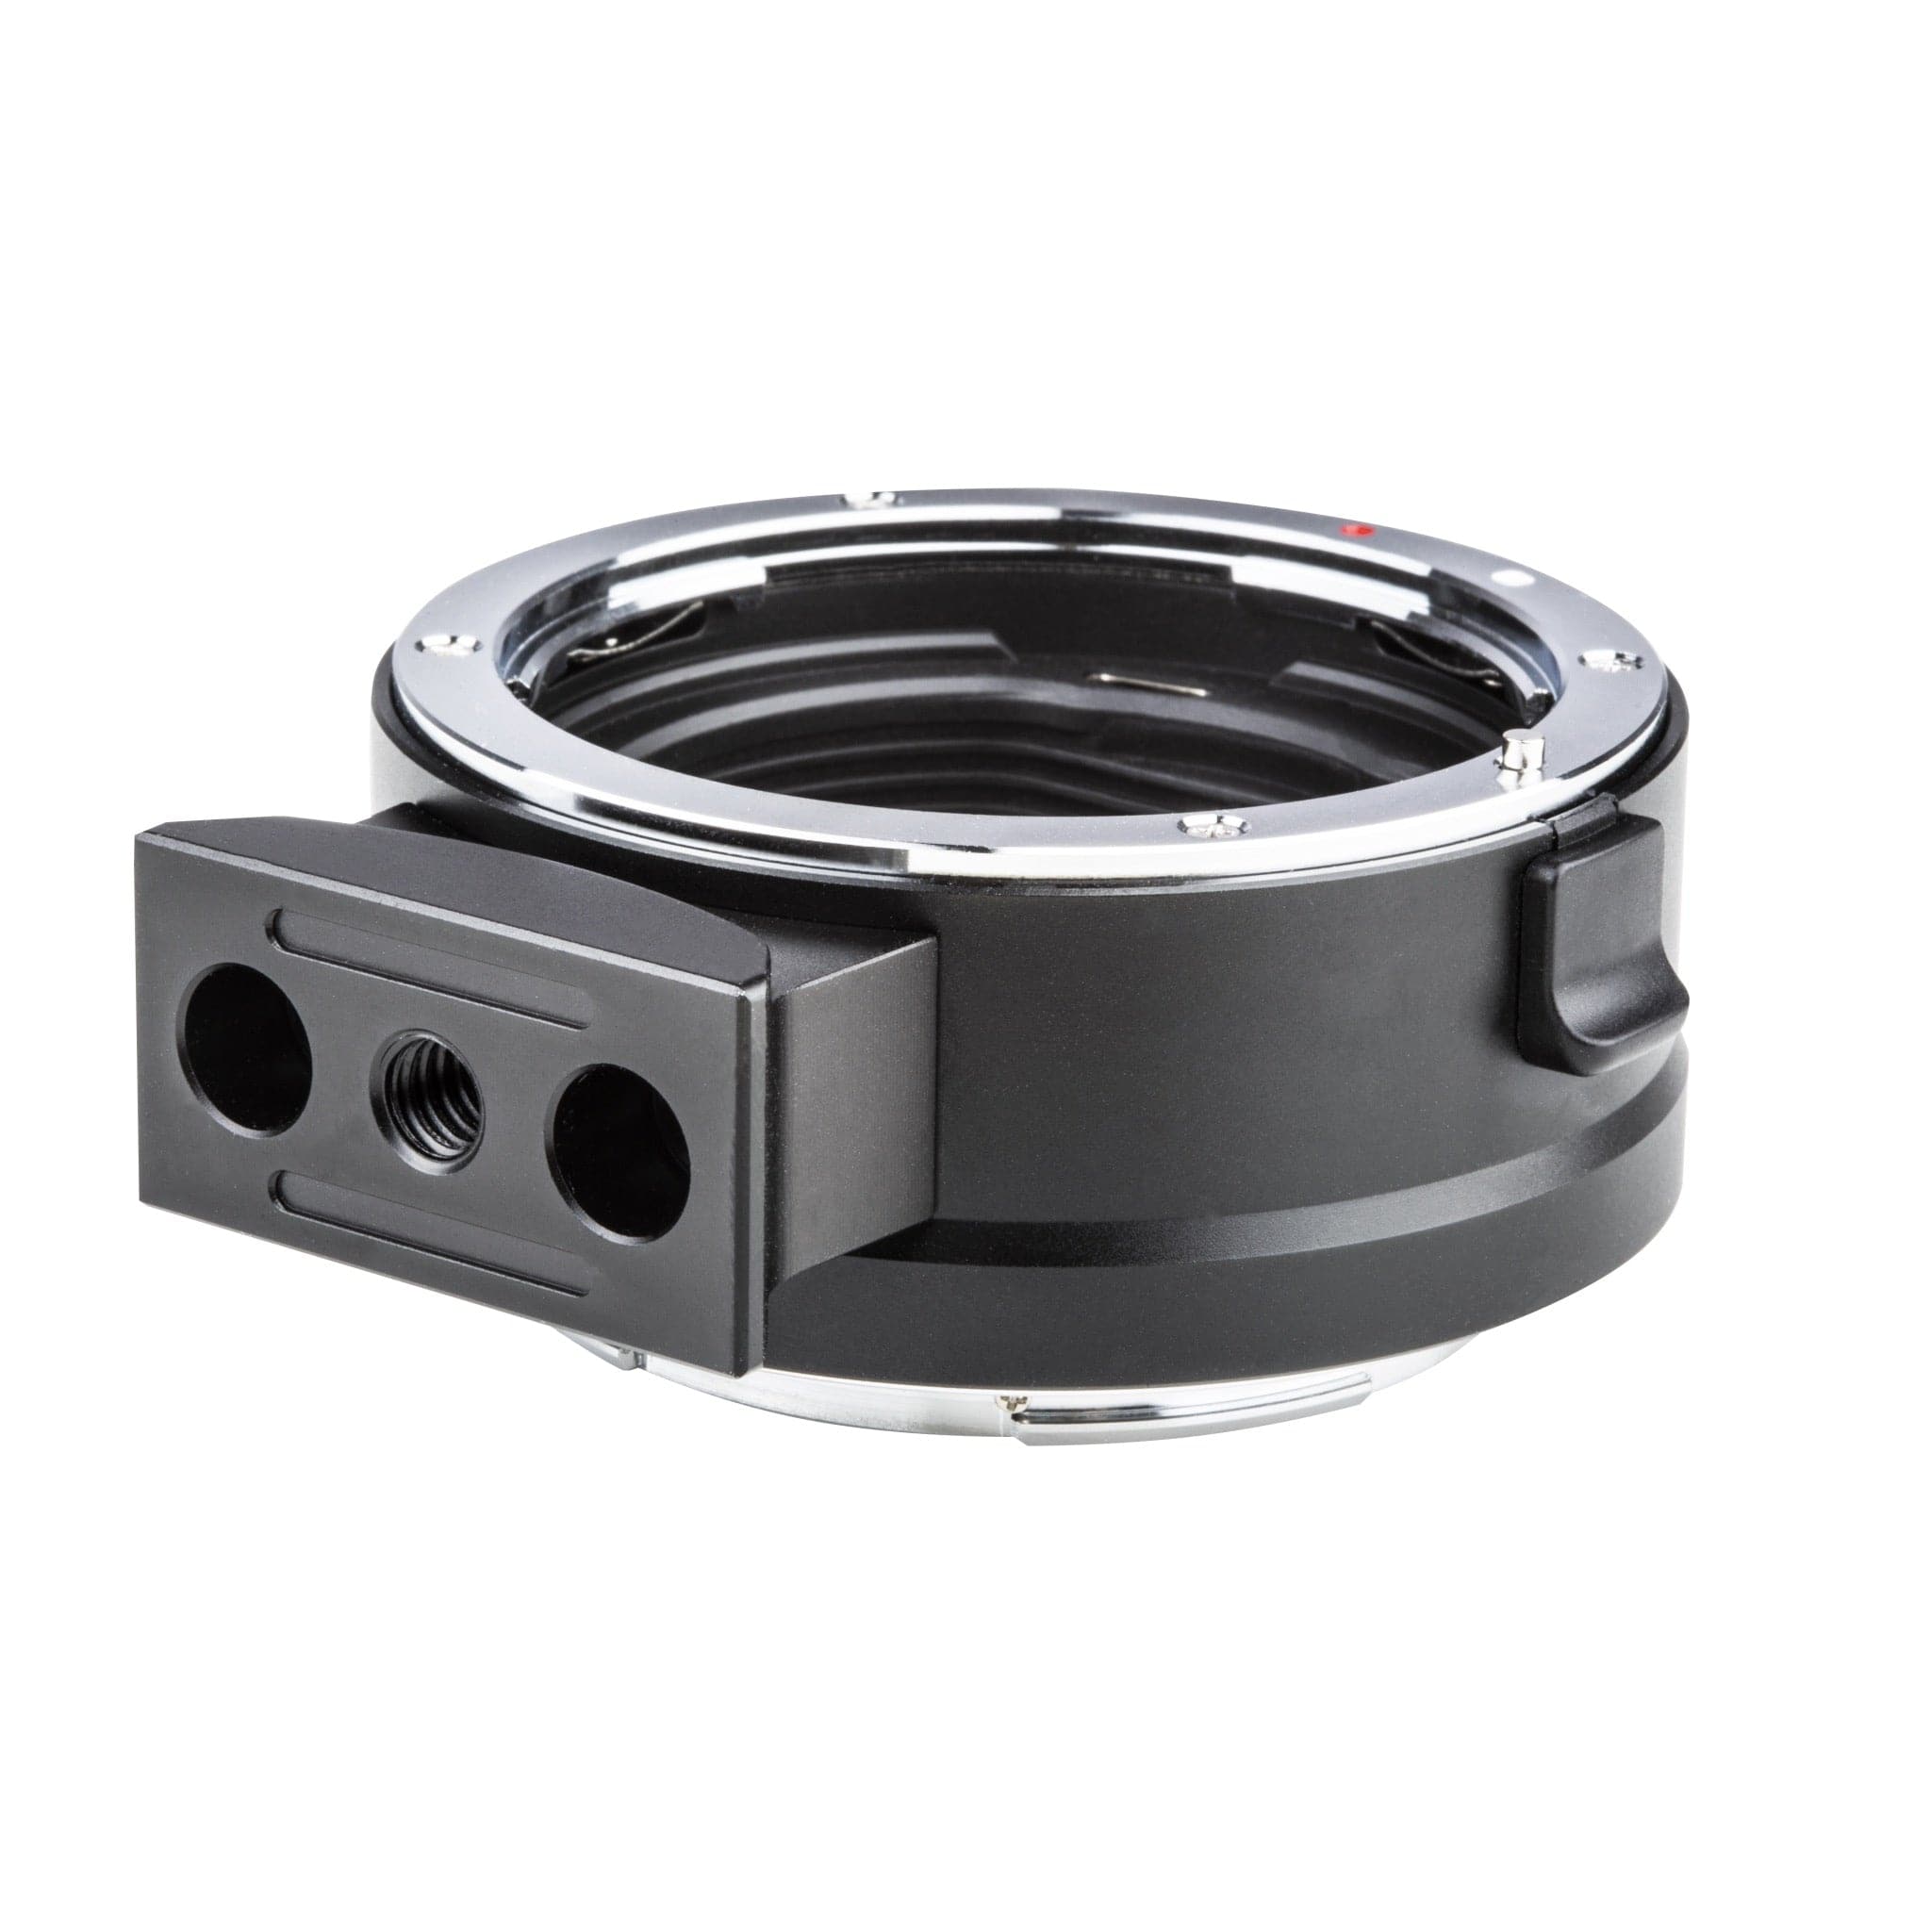 Viltrox EF-Z Lens Mount Adapter Ring Auto Focus Compatible with Canon EF/EF-S Lens to Nikon